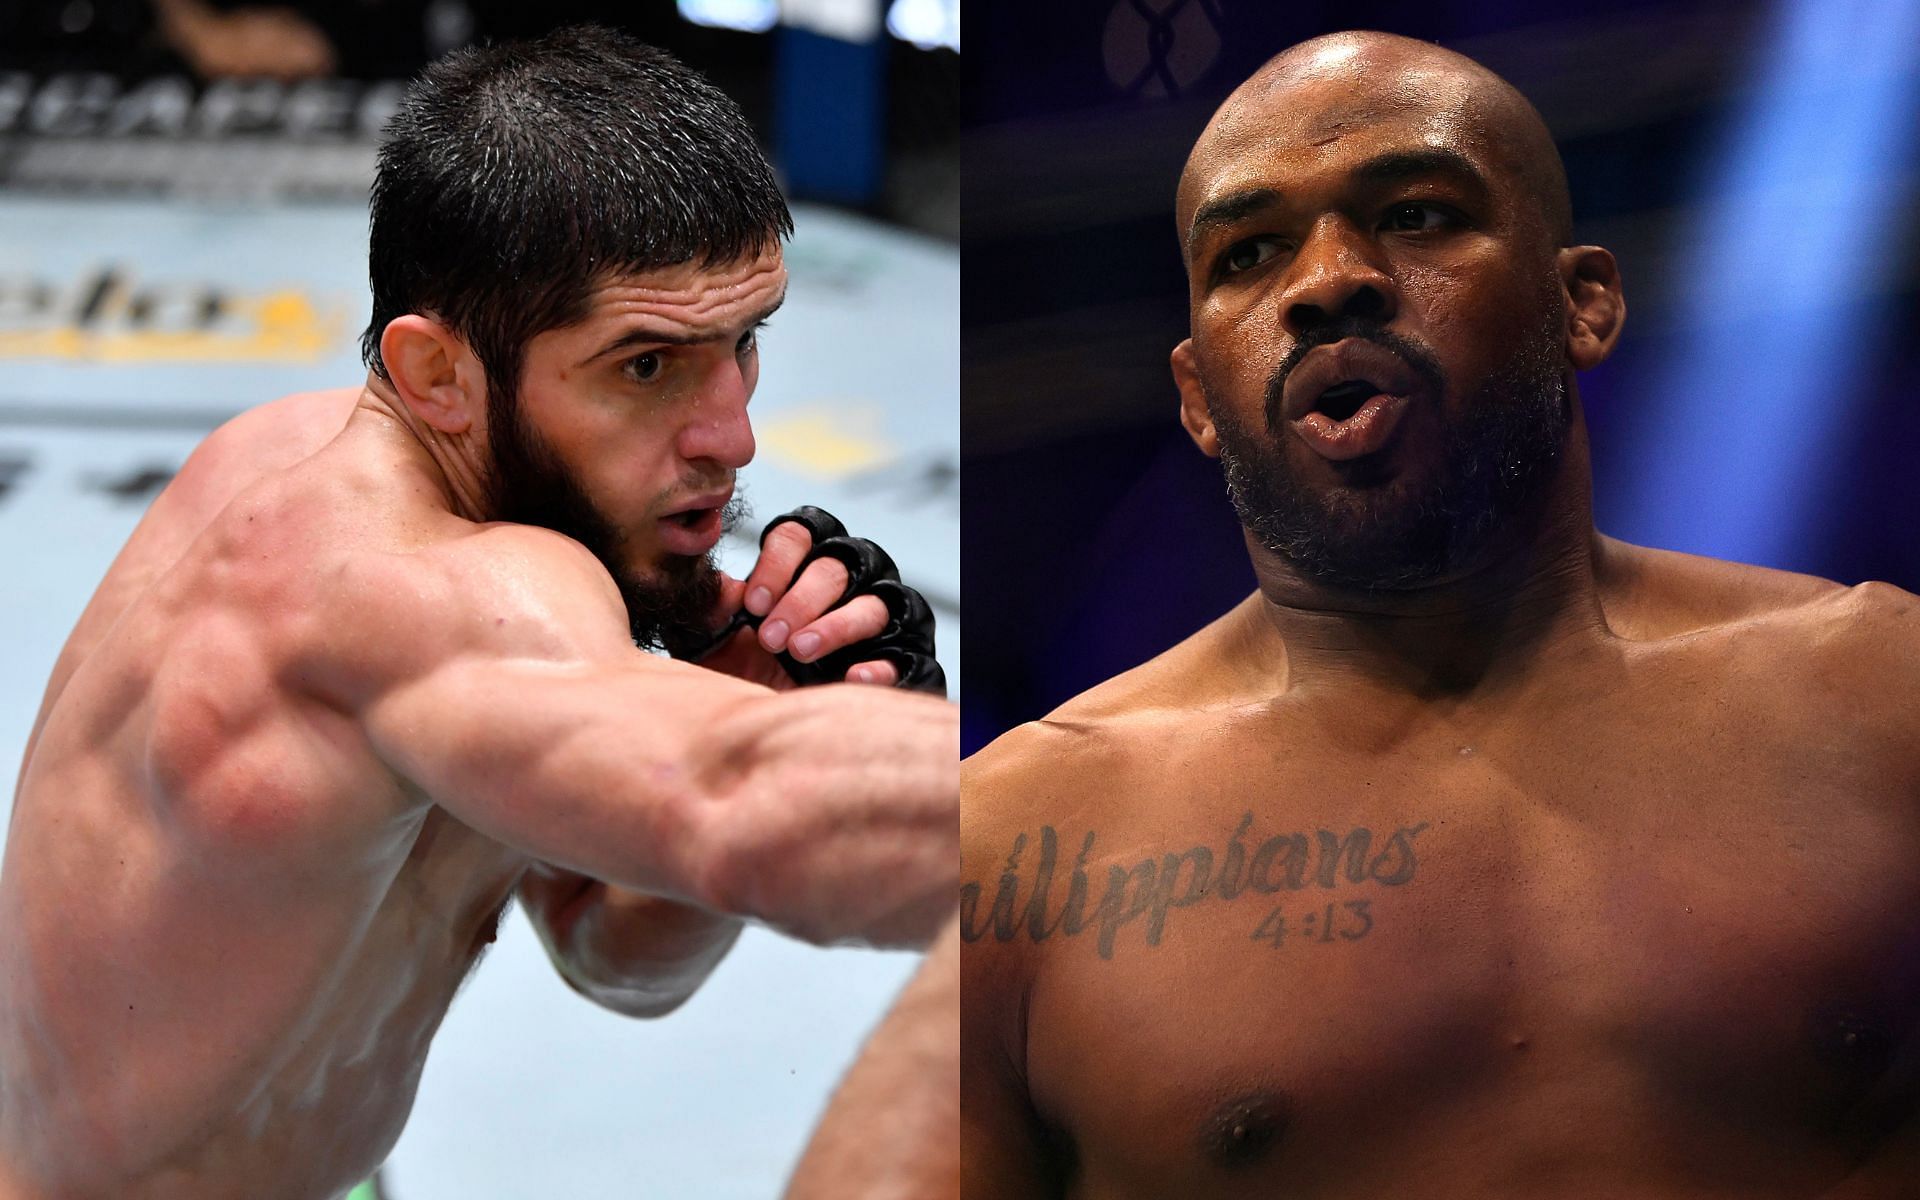 Islam Makhachev (left) and Jon Jones (right) are counted among the most skilled MMA fighters ever [Images courtesy: Getty Images]